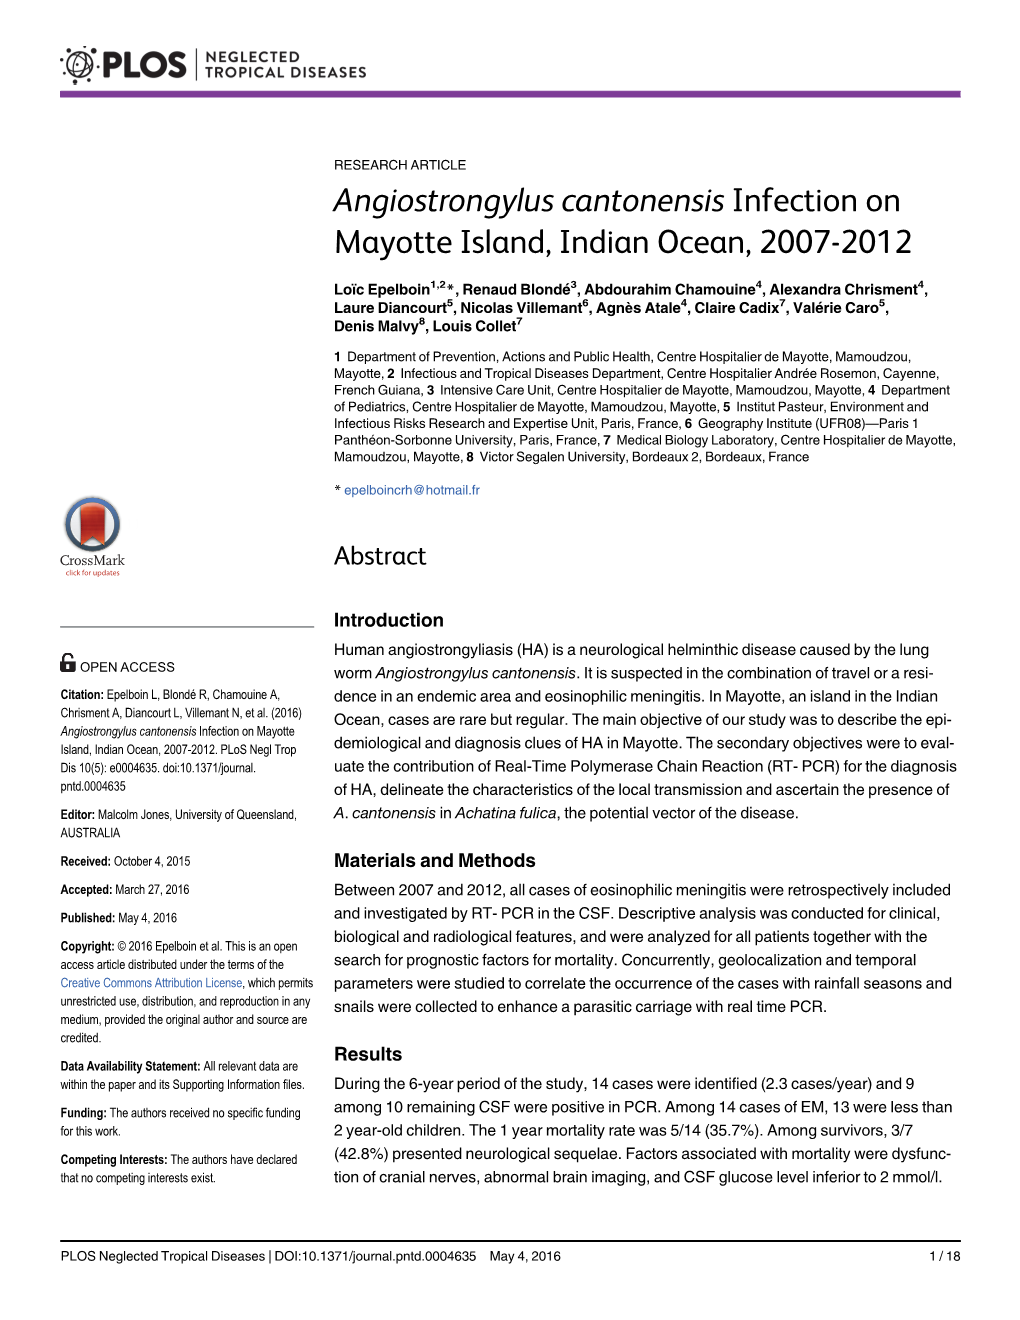 Angiostrongylus Cantonensis Infection on Mayotte Island, Indian Ocean, 2007-2012